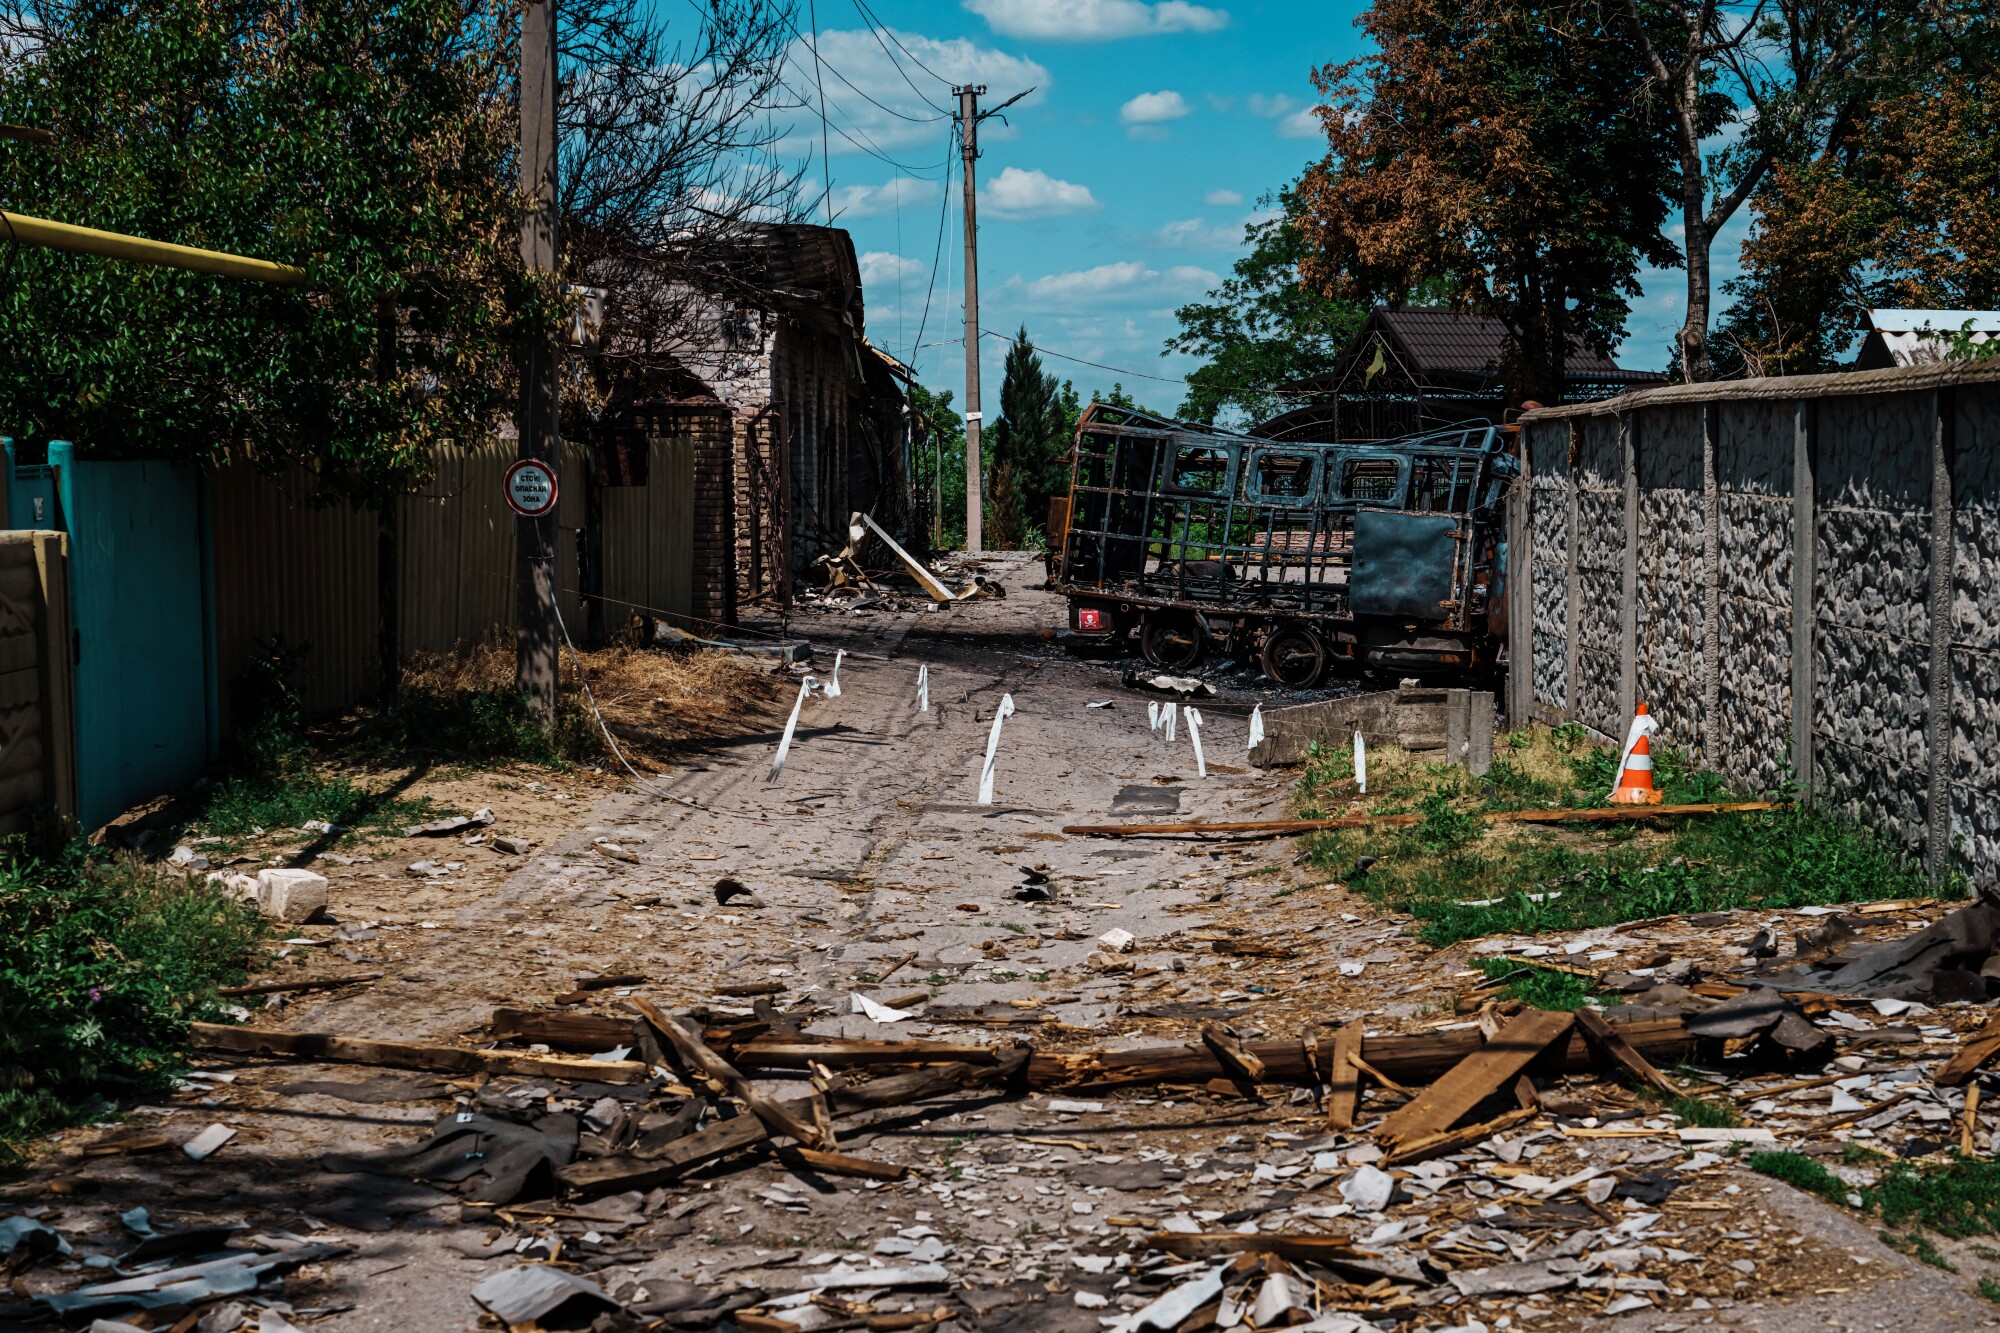 A street is covered in debris after a bombardment hit a cargo truck, near Lysychansk, Ukraine